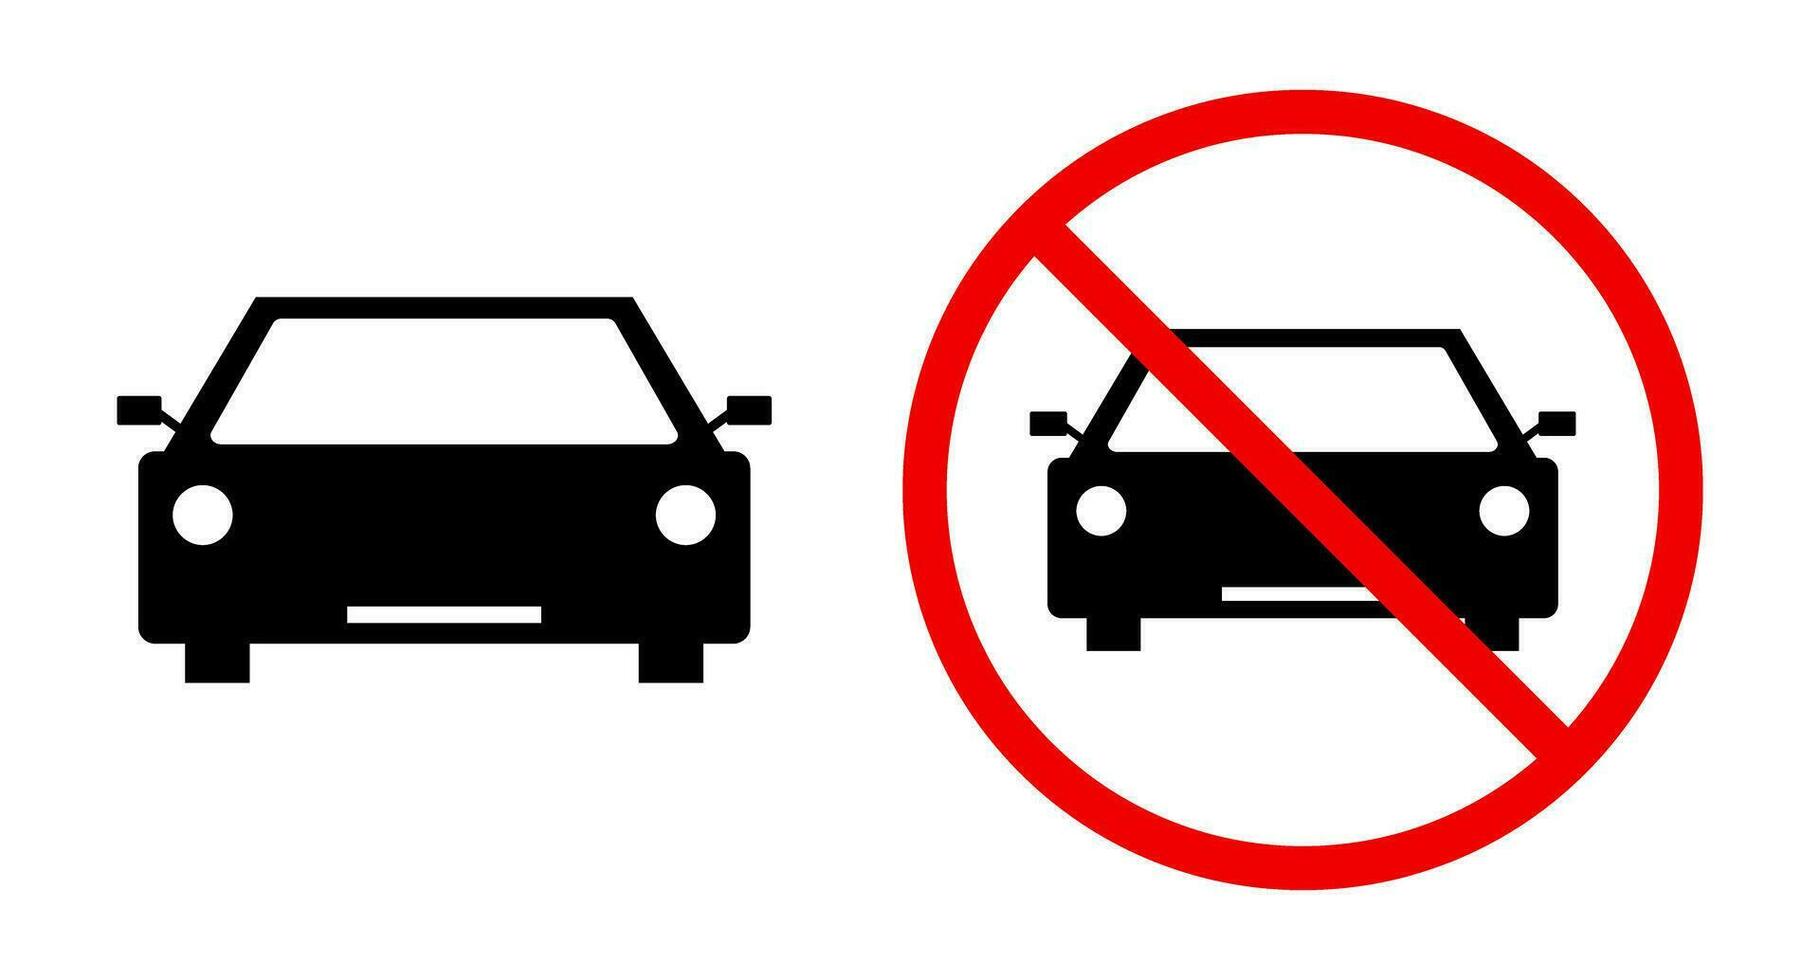 Car silhouette icon and no parking icon. Vector. vector